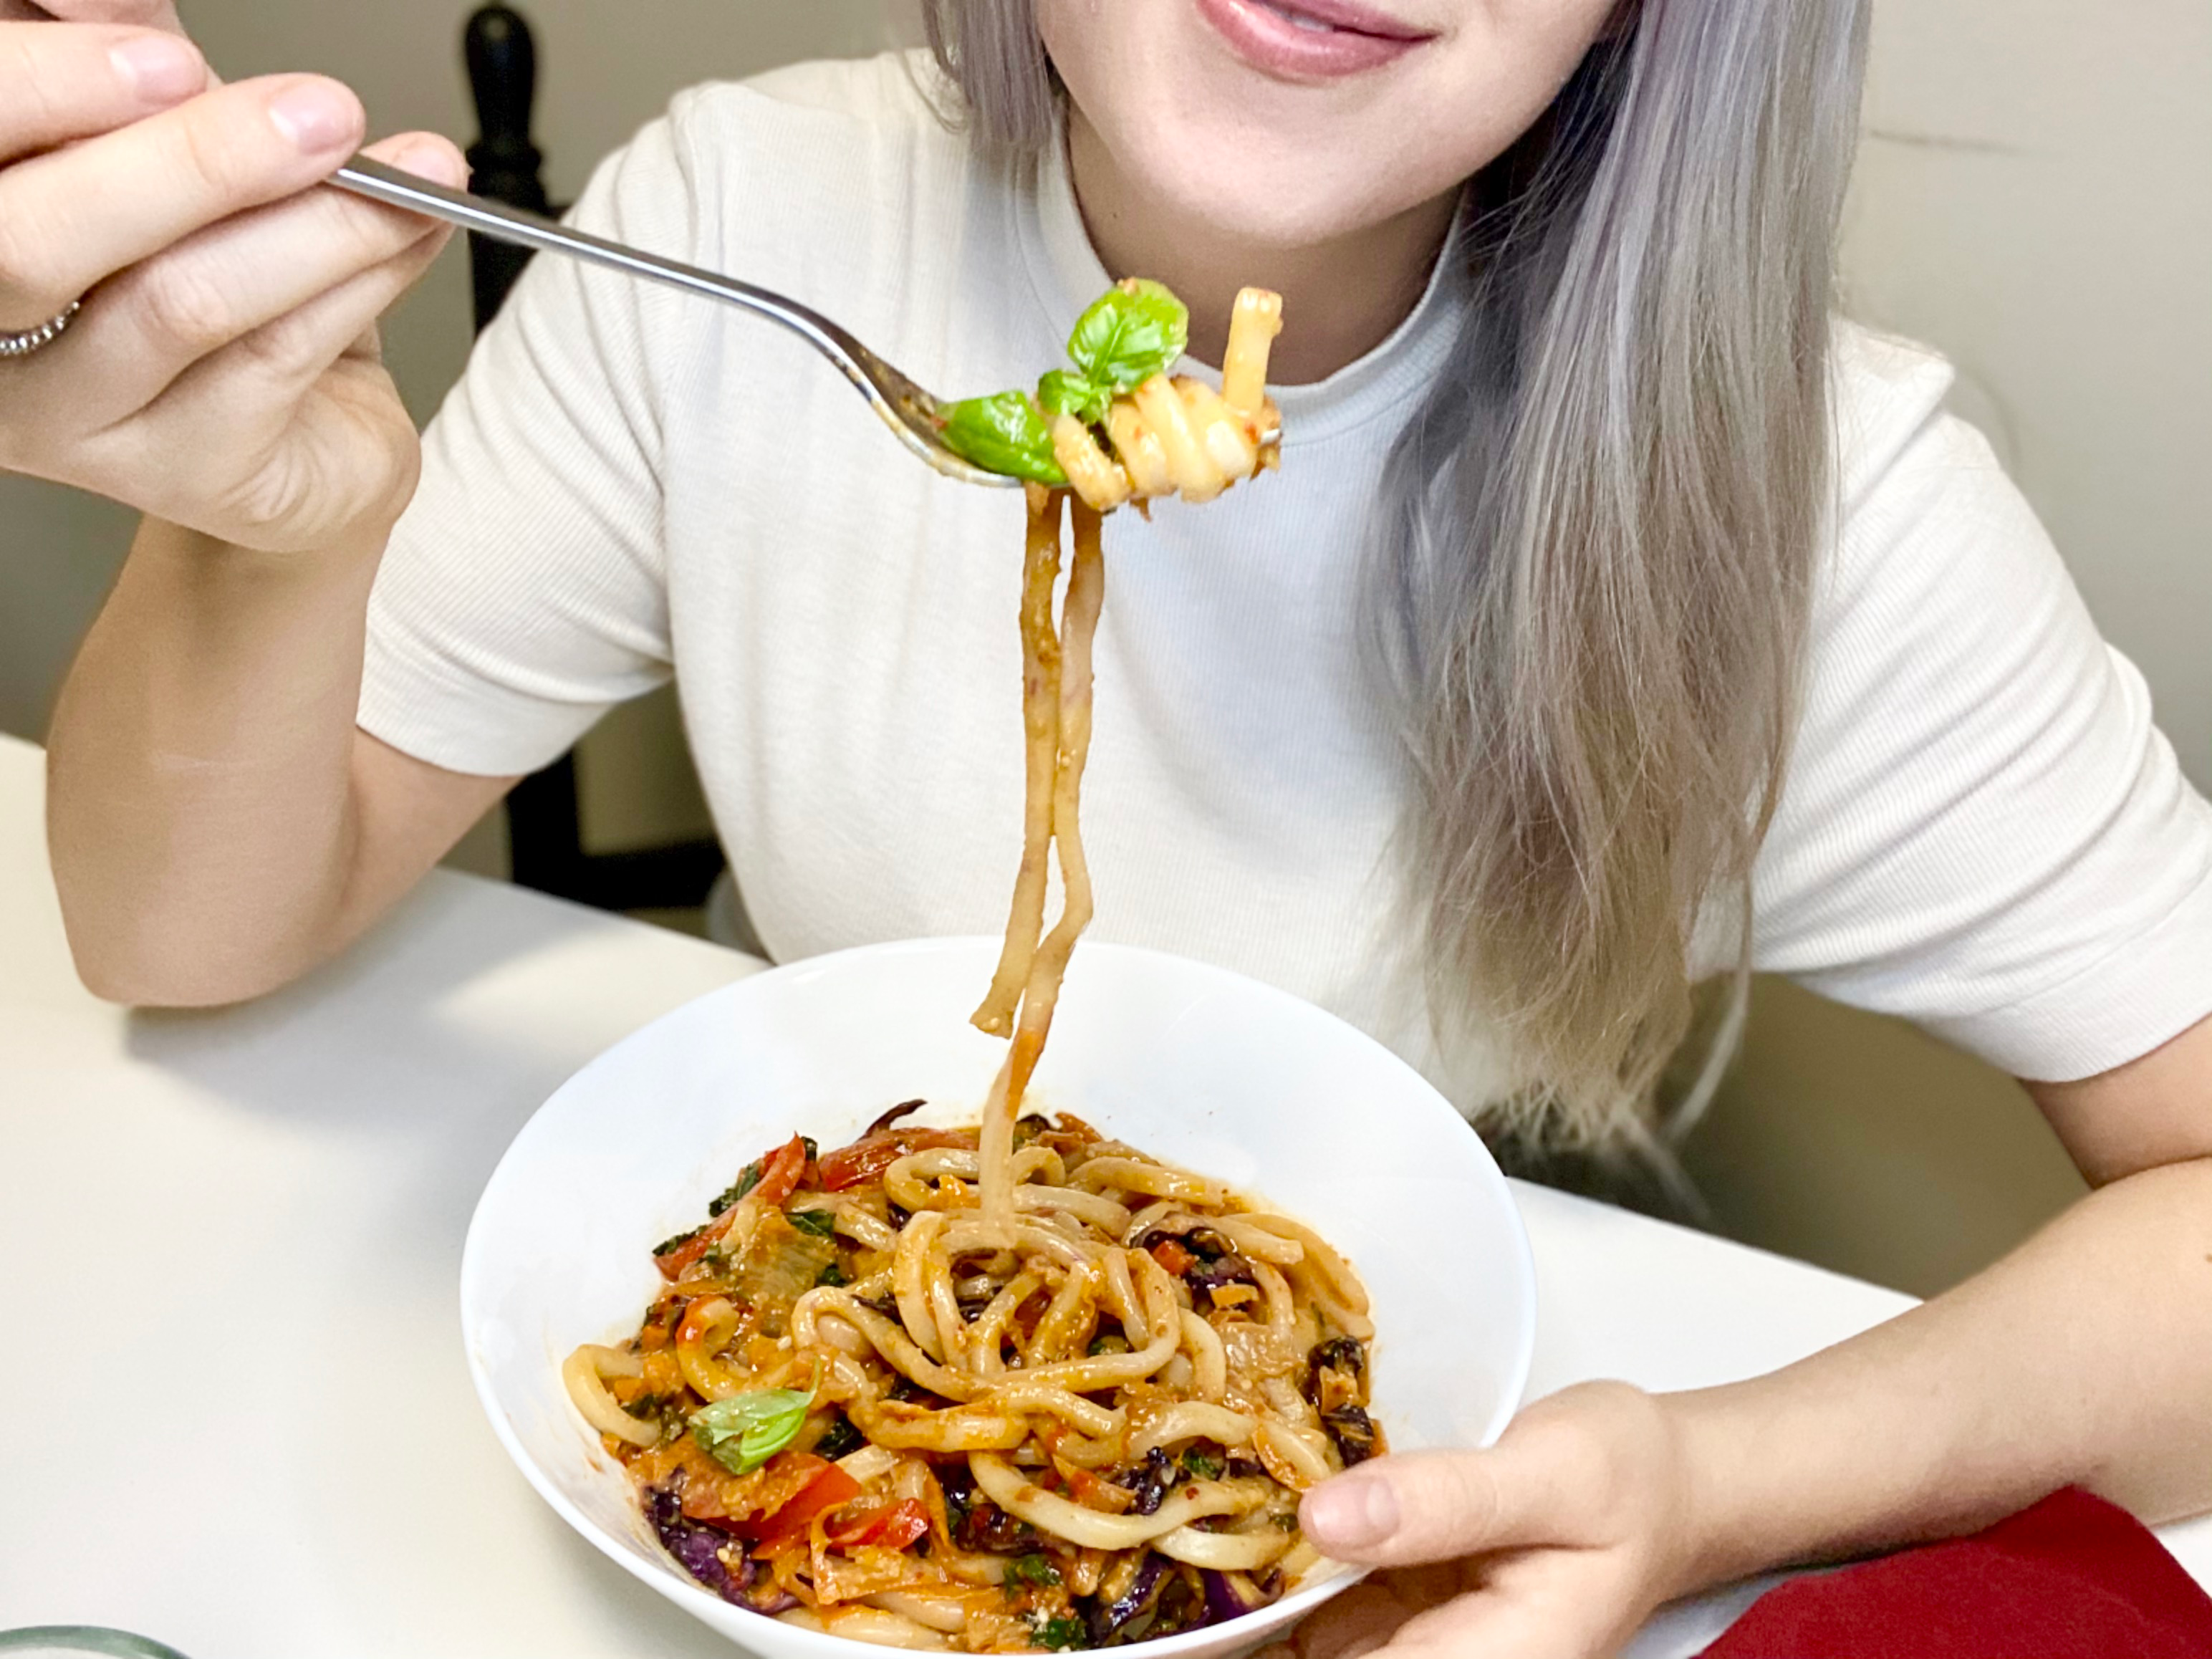 Person smiling and eating noodle bowl filled with veggies and a natural peanut butter sauce.